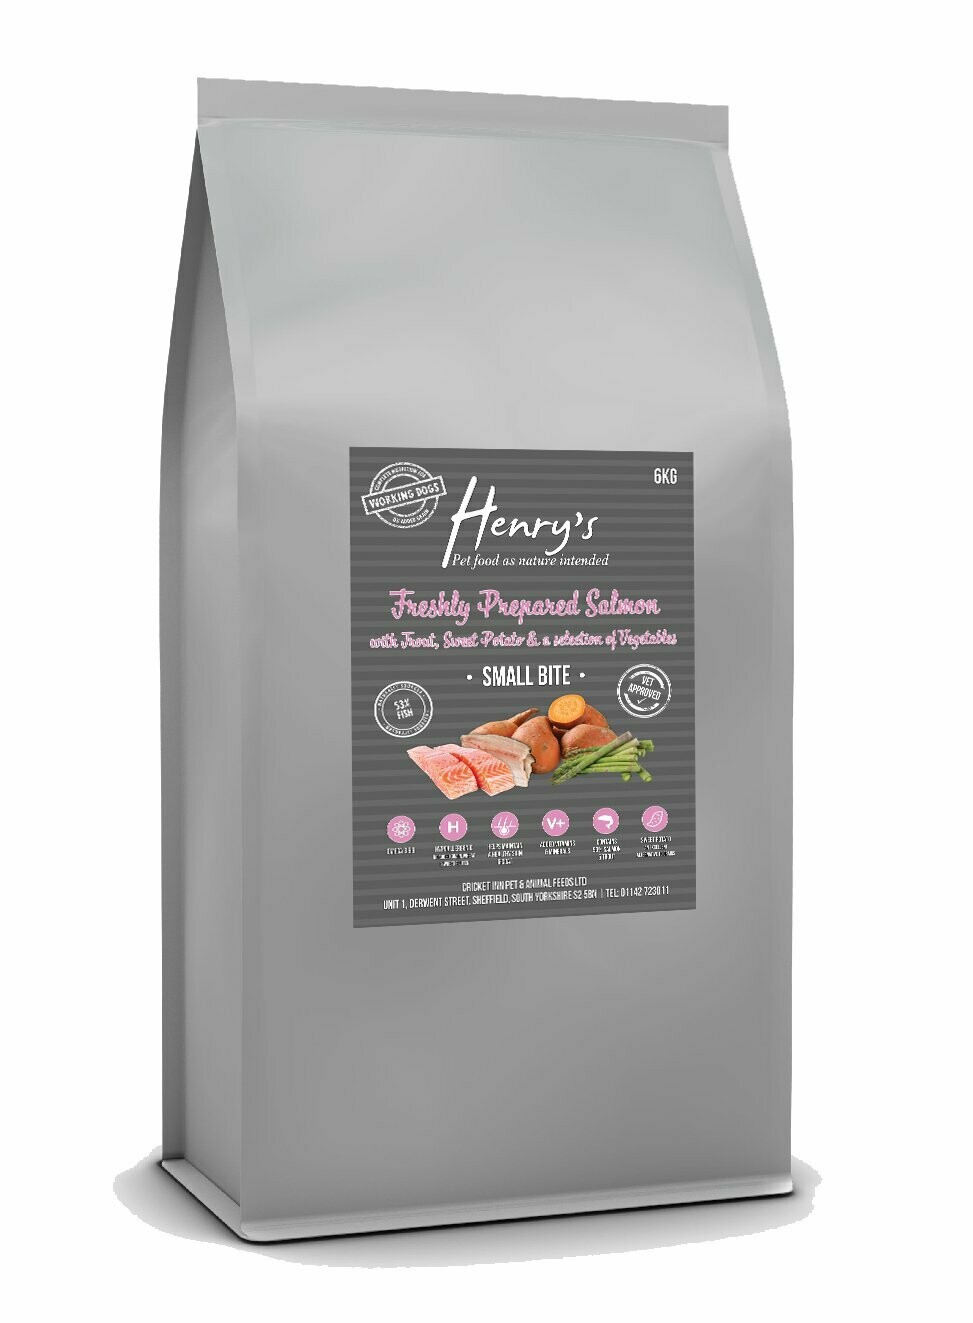 6kg Salmon And Trout, Sweet Potato And Mixed Vegetables - Hypo Allergenic - Grain Free Dog Food - SMALL BITE